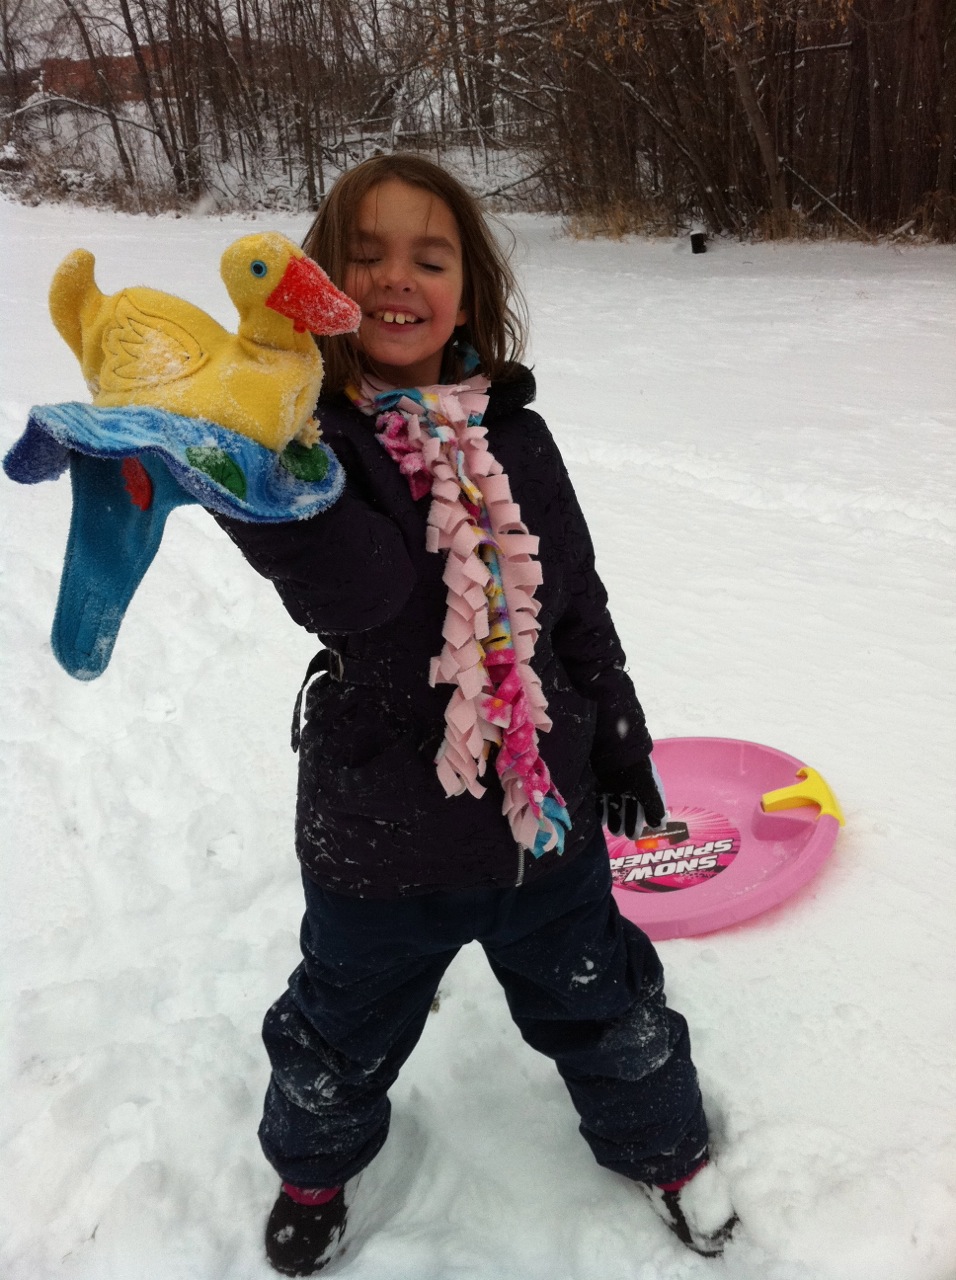 Analise took a tumble in the deep snow, and her duck took a snow bath!